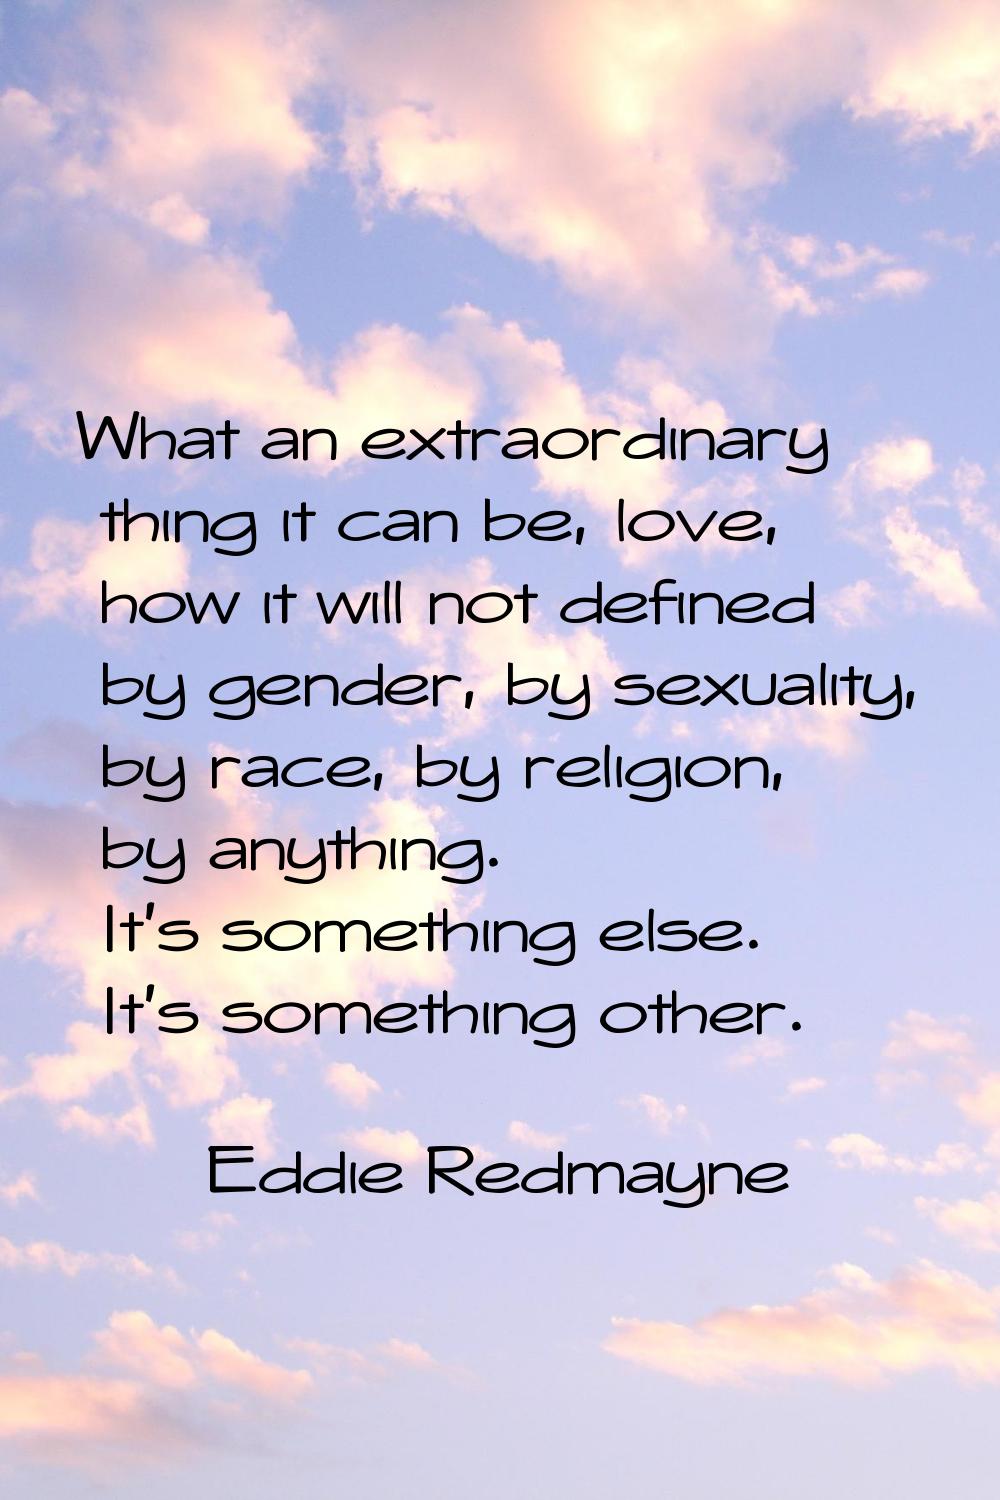 What an extraordinary thing it can be, love, how it will not defined by gender, by sexuality, by ra